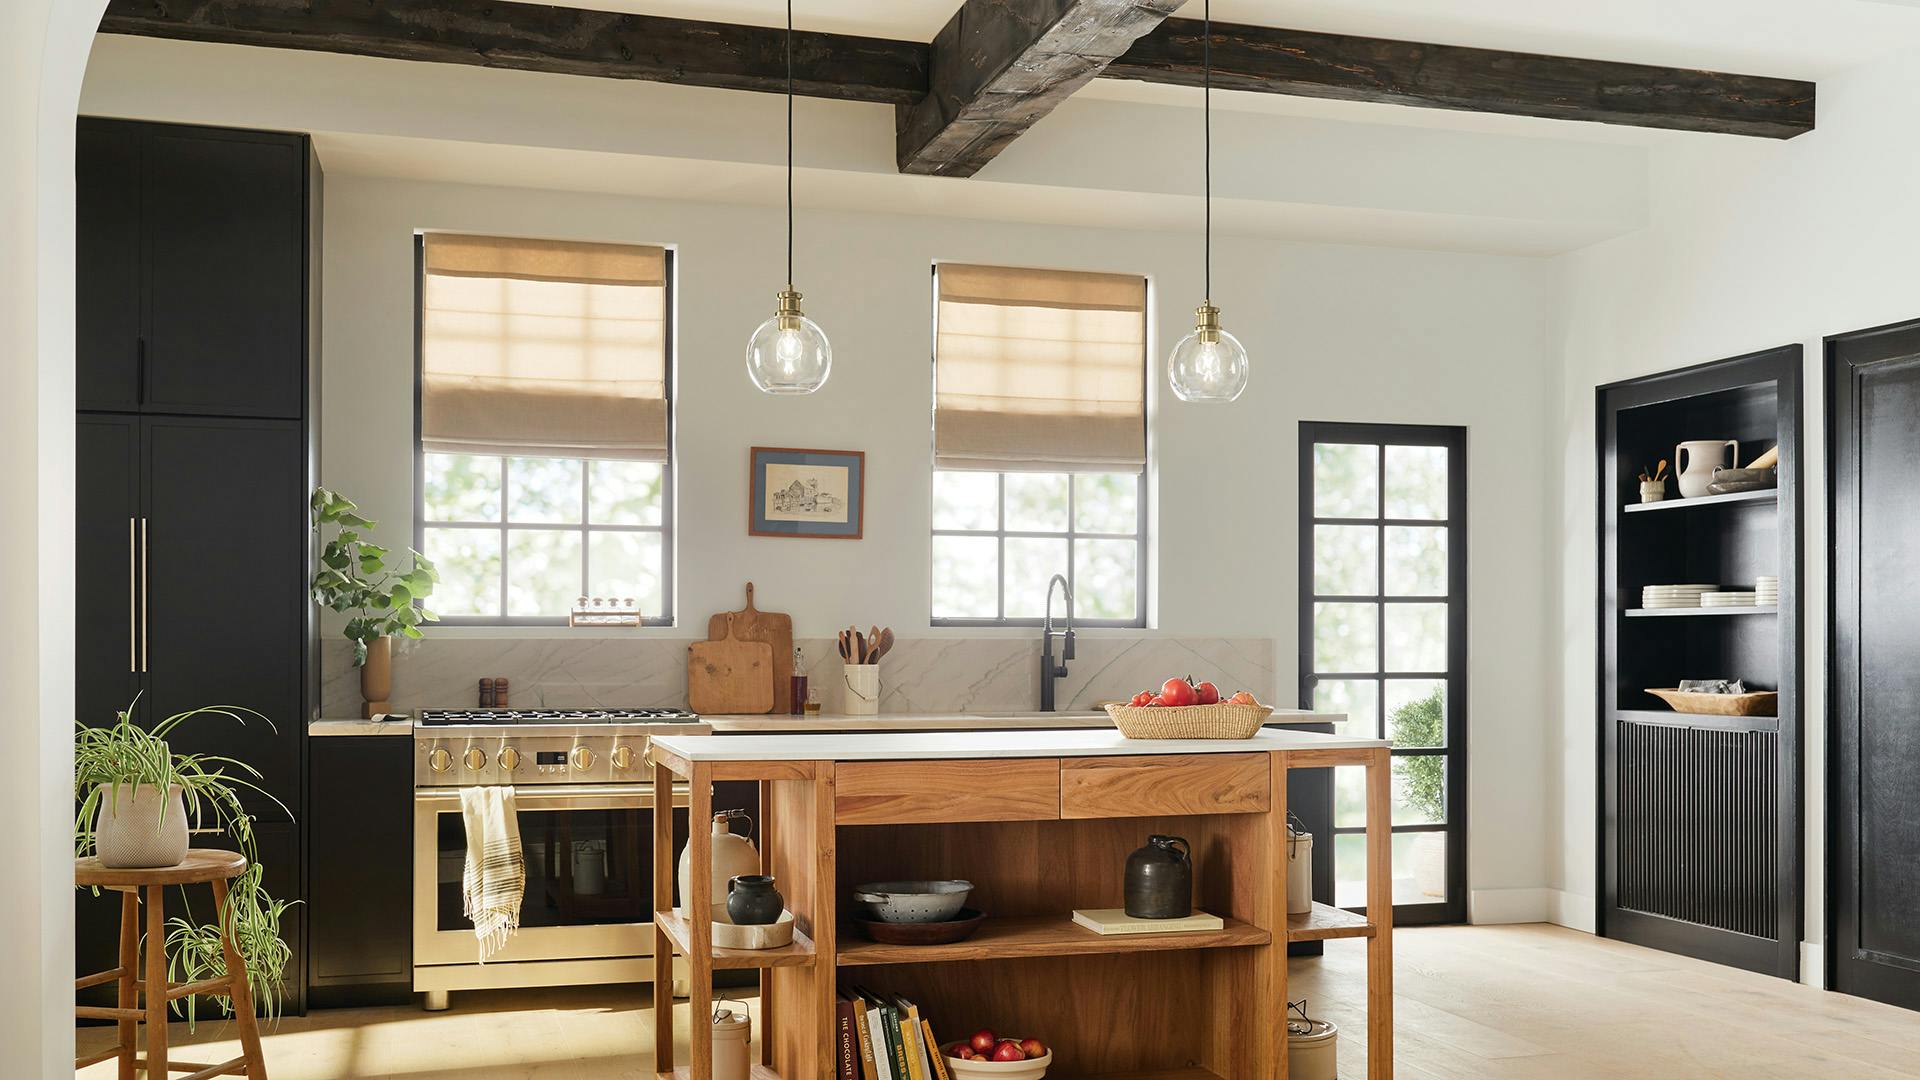 Industrial kitchen with Clove pendants over the counter